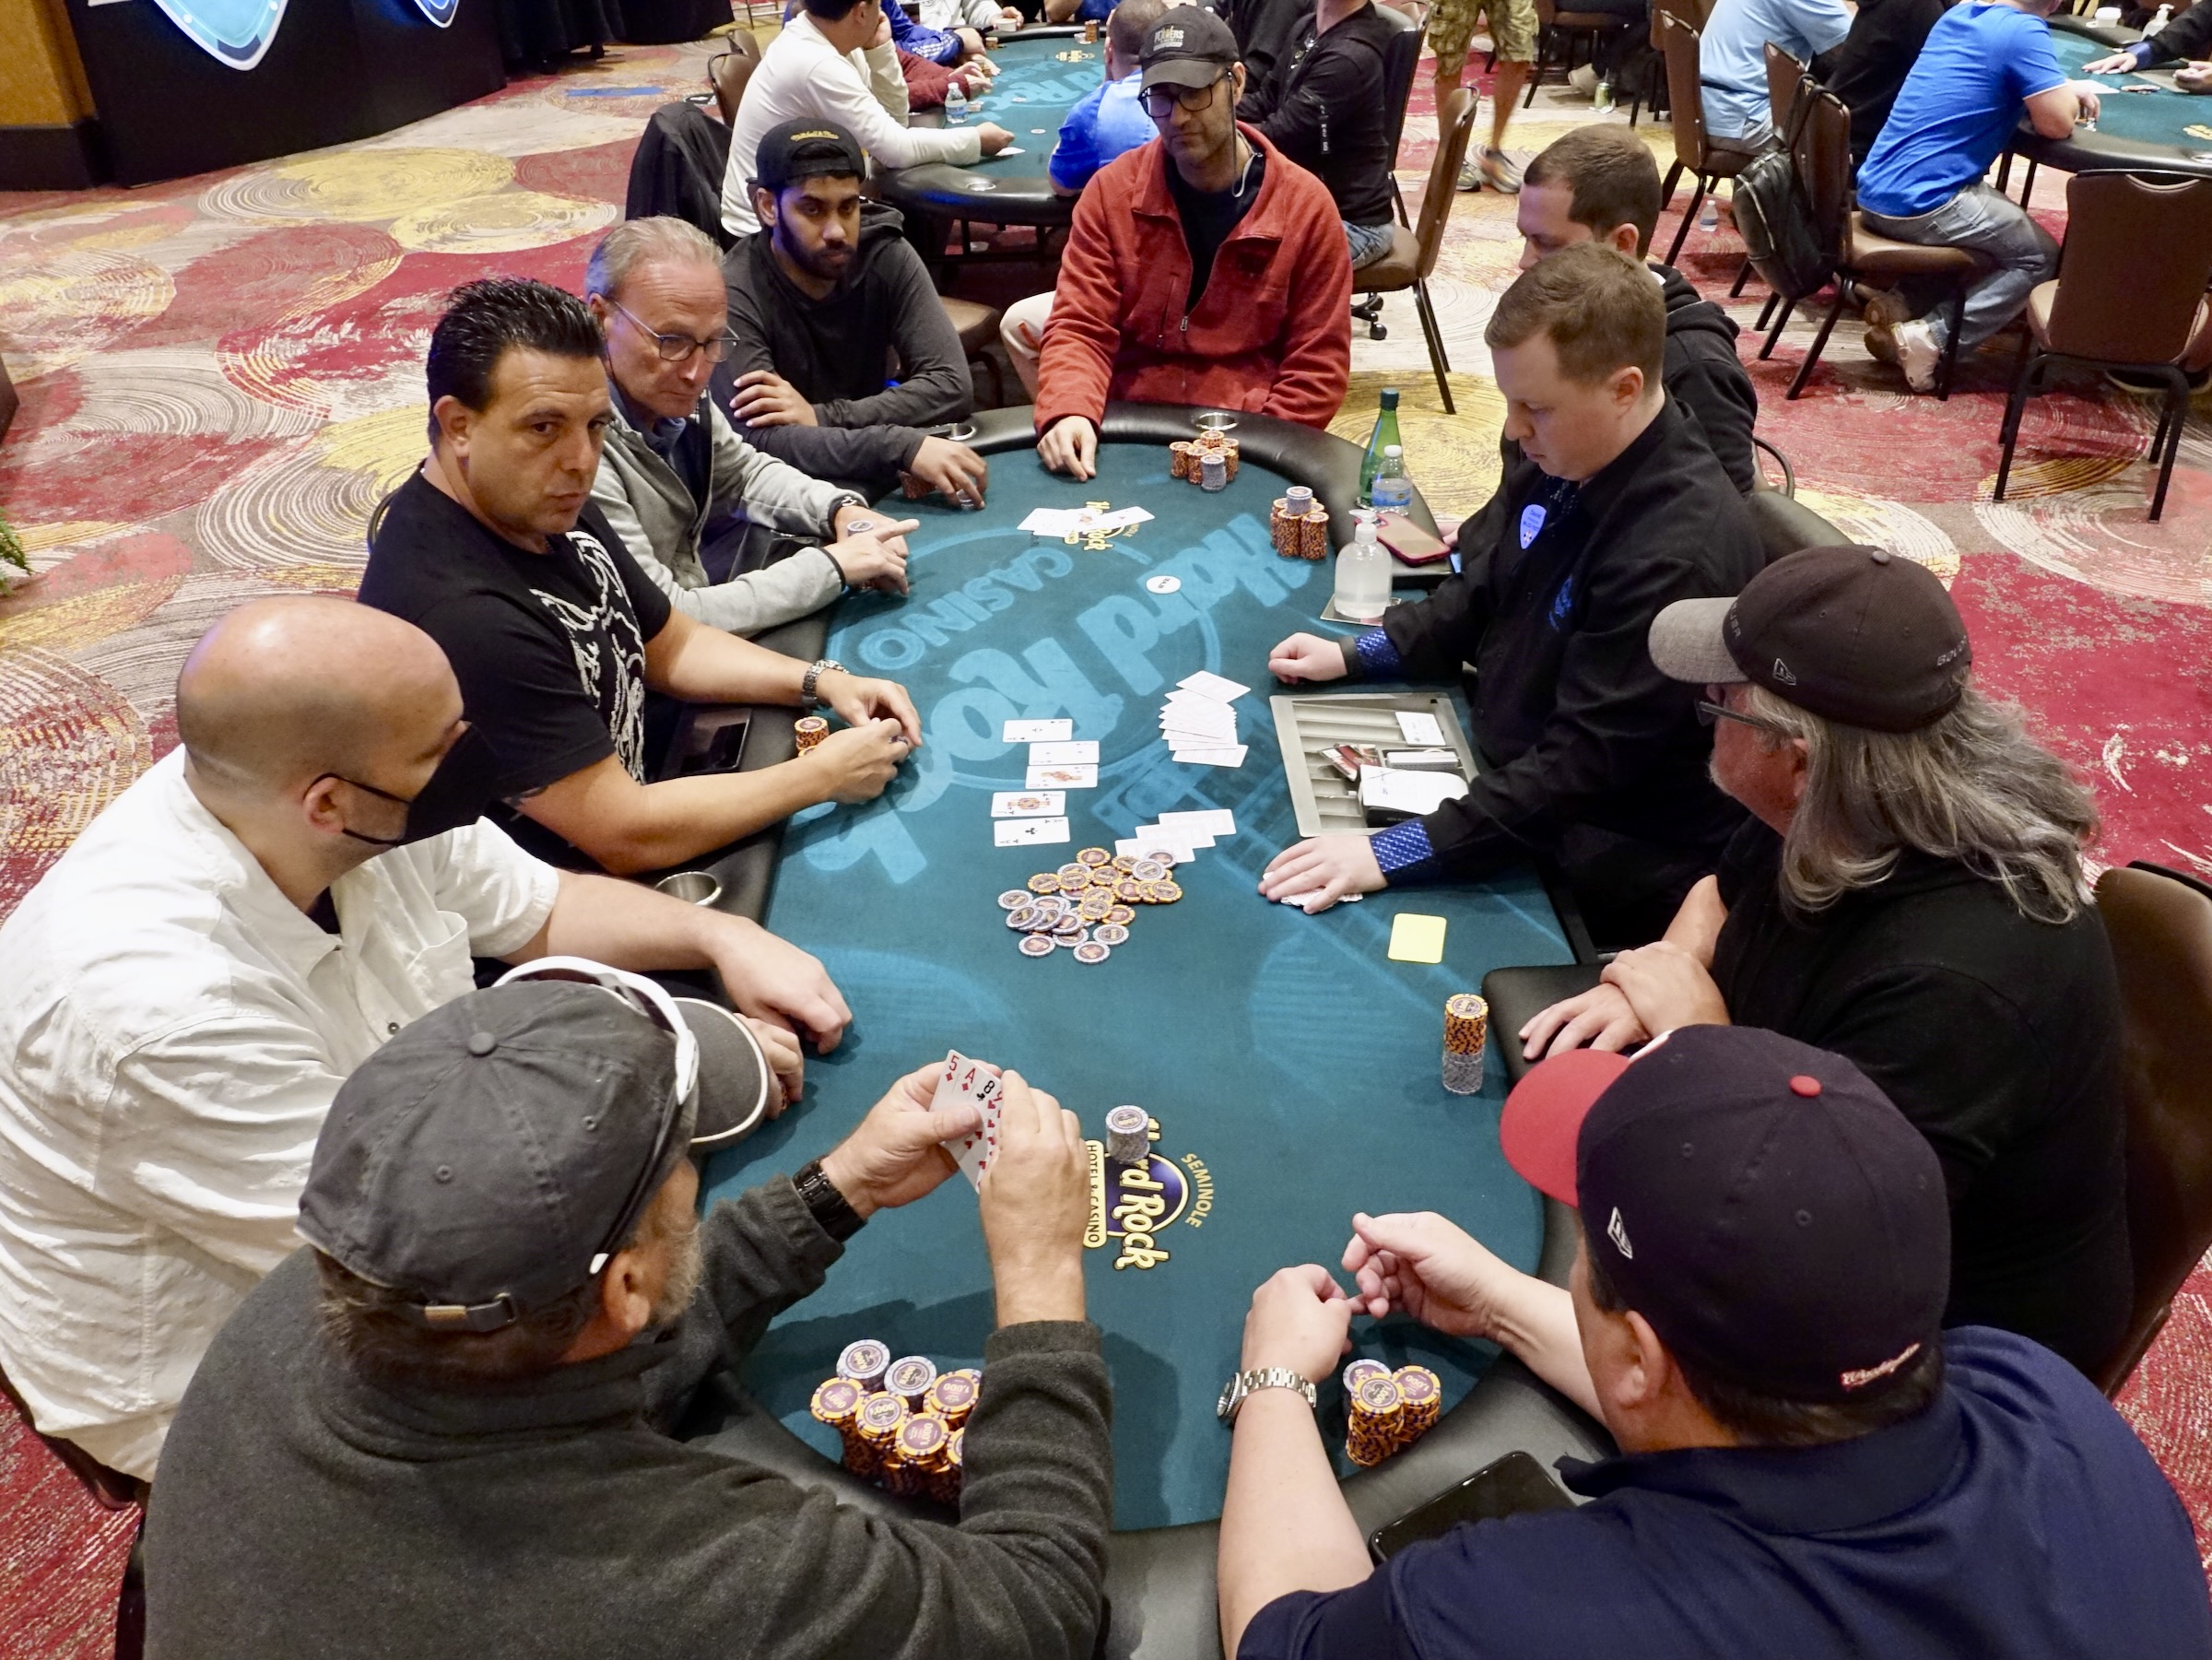 Event 4 Final Table